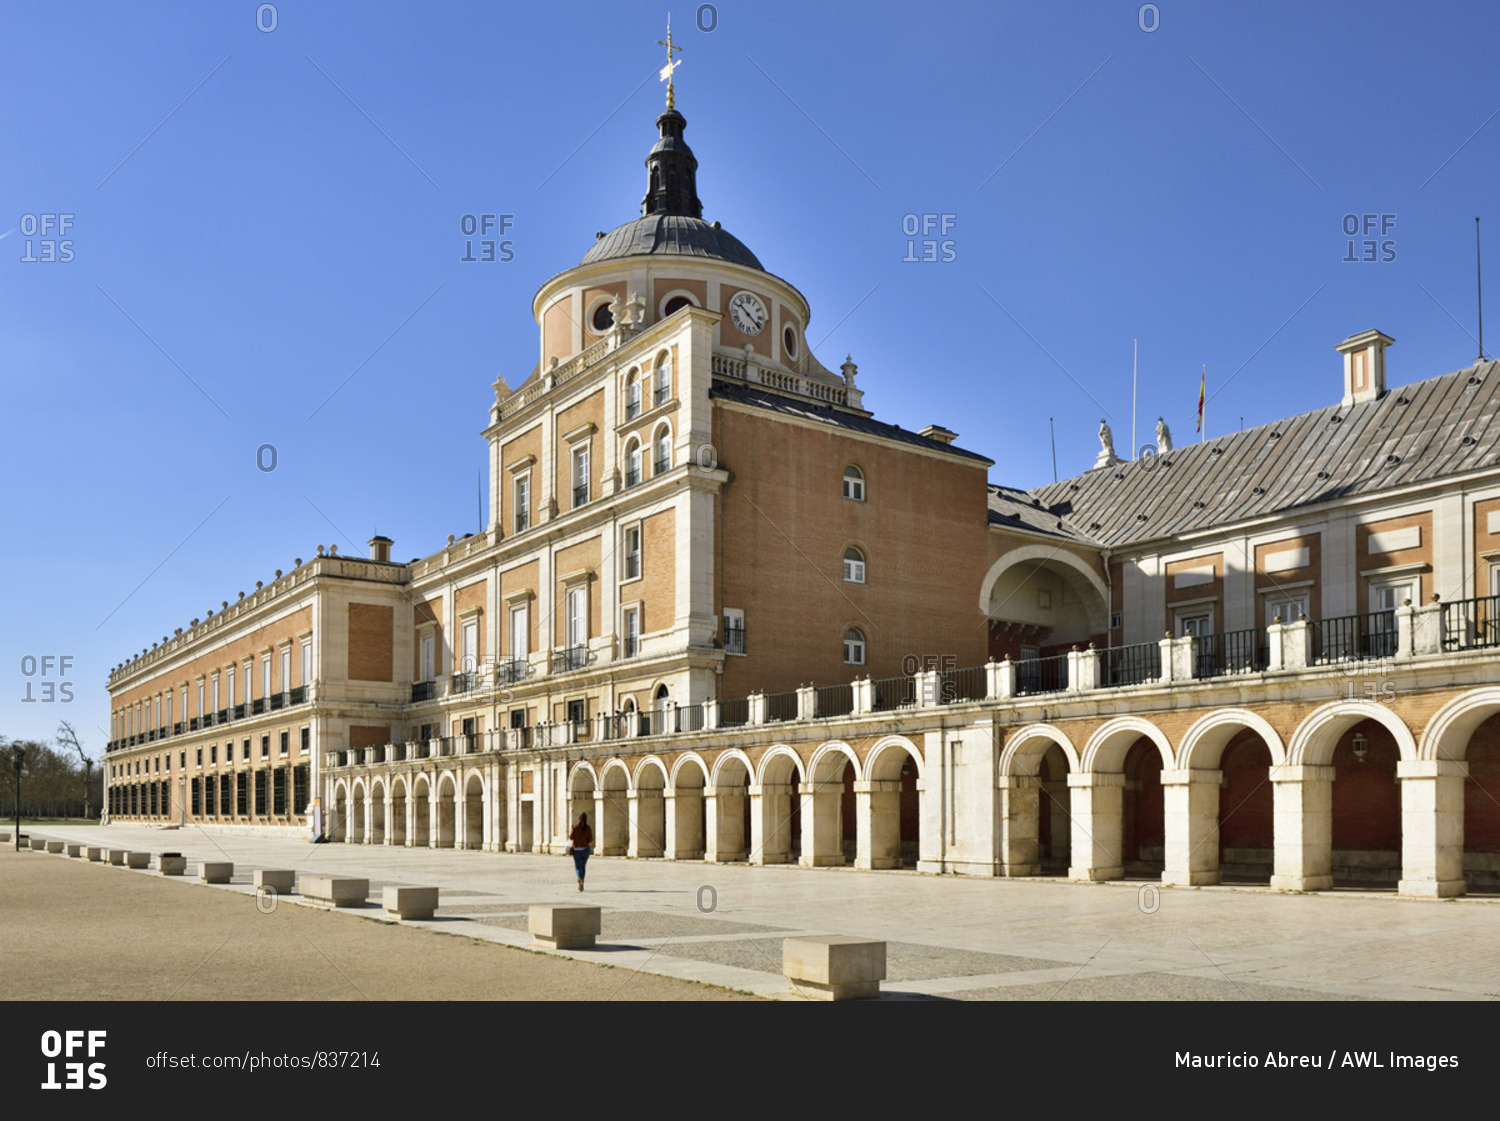 The Royal Palace of Aranjuez (Palacio Real de Aranjuez) is a former Spanish royal residence dating back to the 16th century. A Unesco World Heritage Site. Aranjuez, Spain